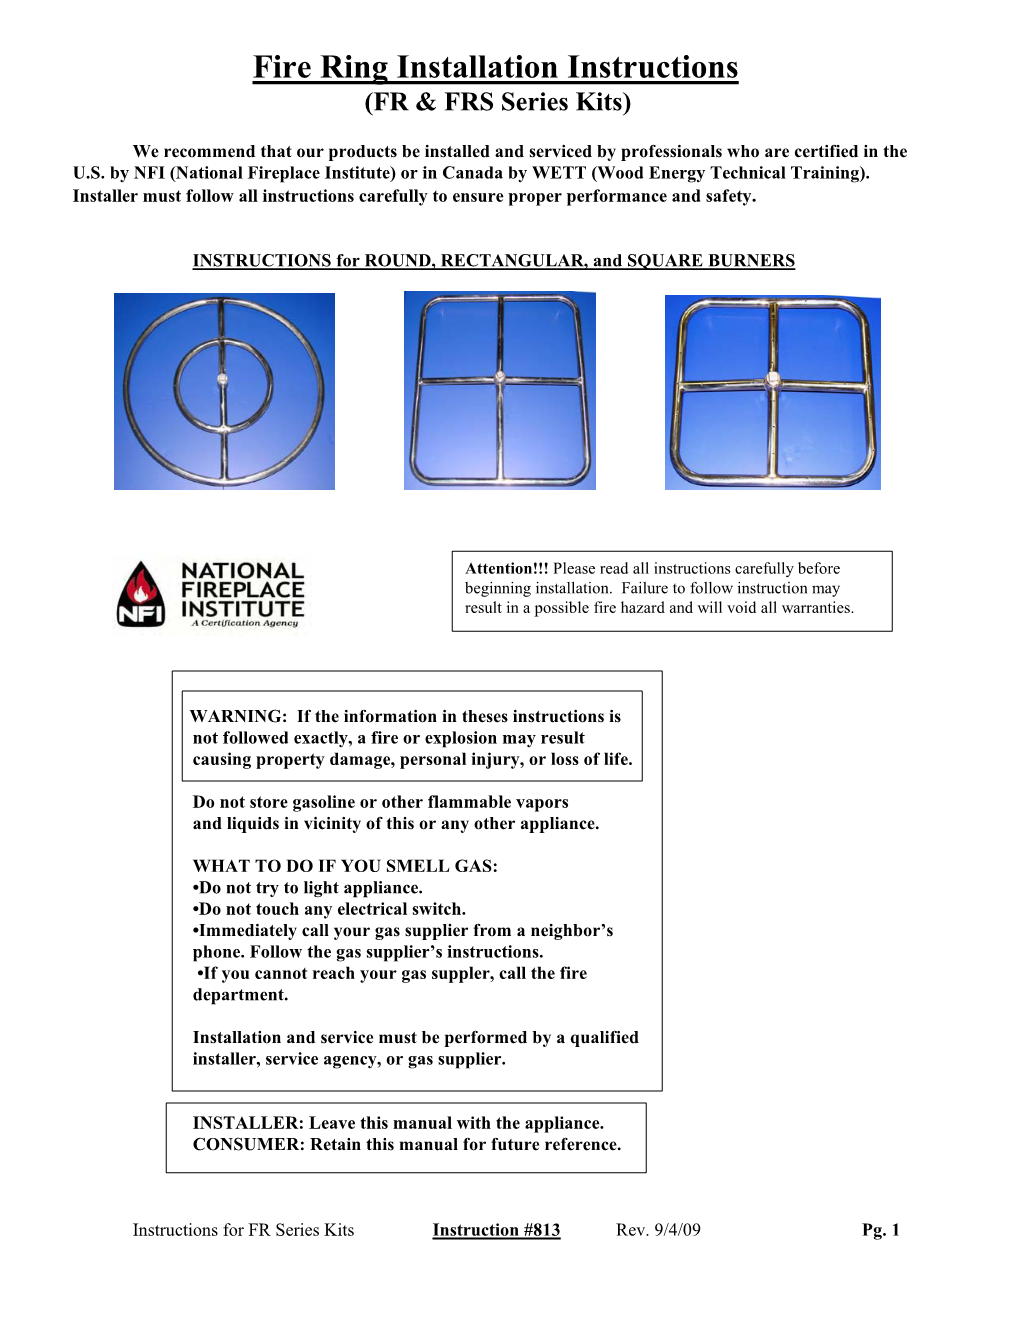 Fire Ring Installation Instructions (FR & FRS Series Kits)